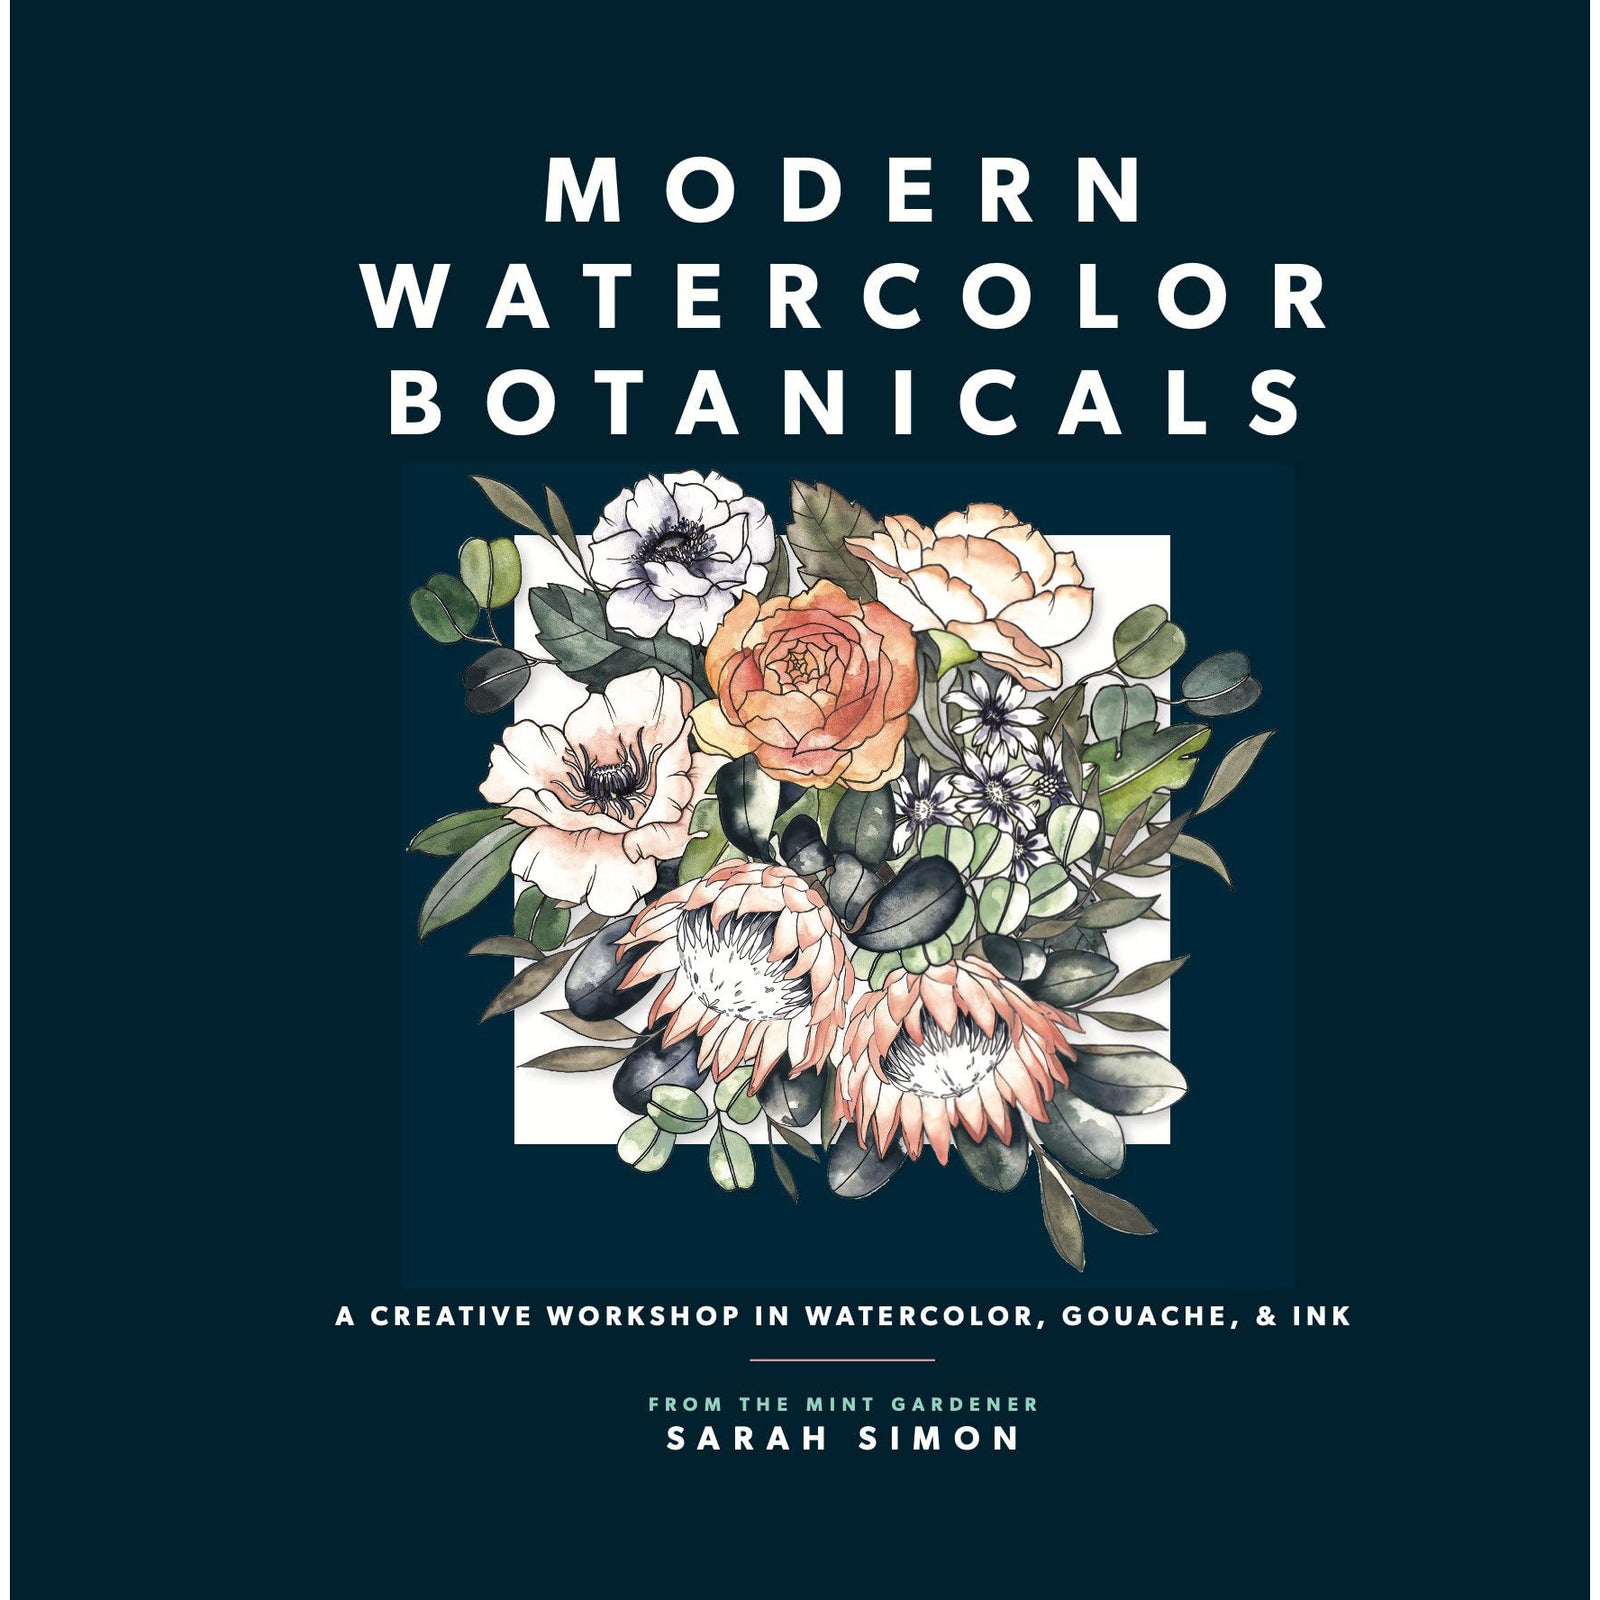 Flowers: The Watercolor Art Pad - Getty Museum Store